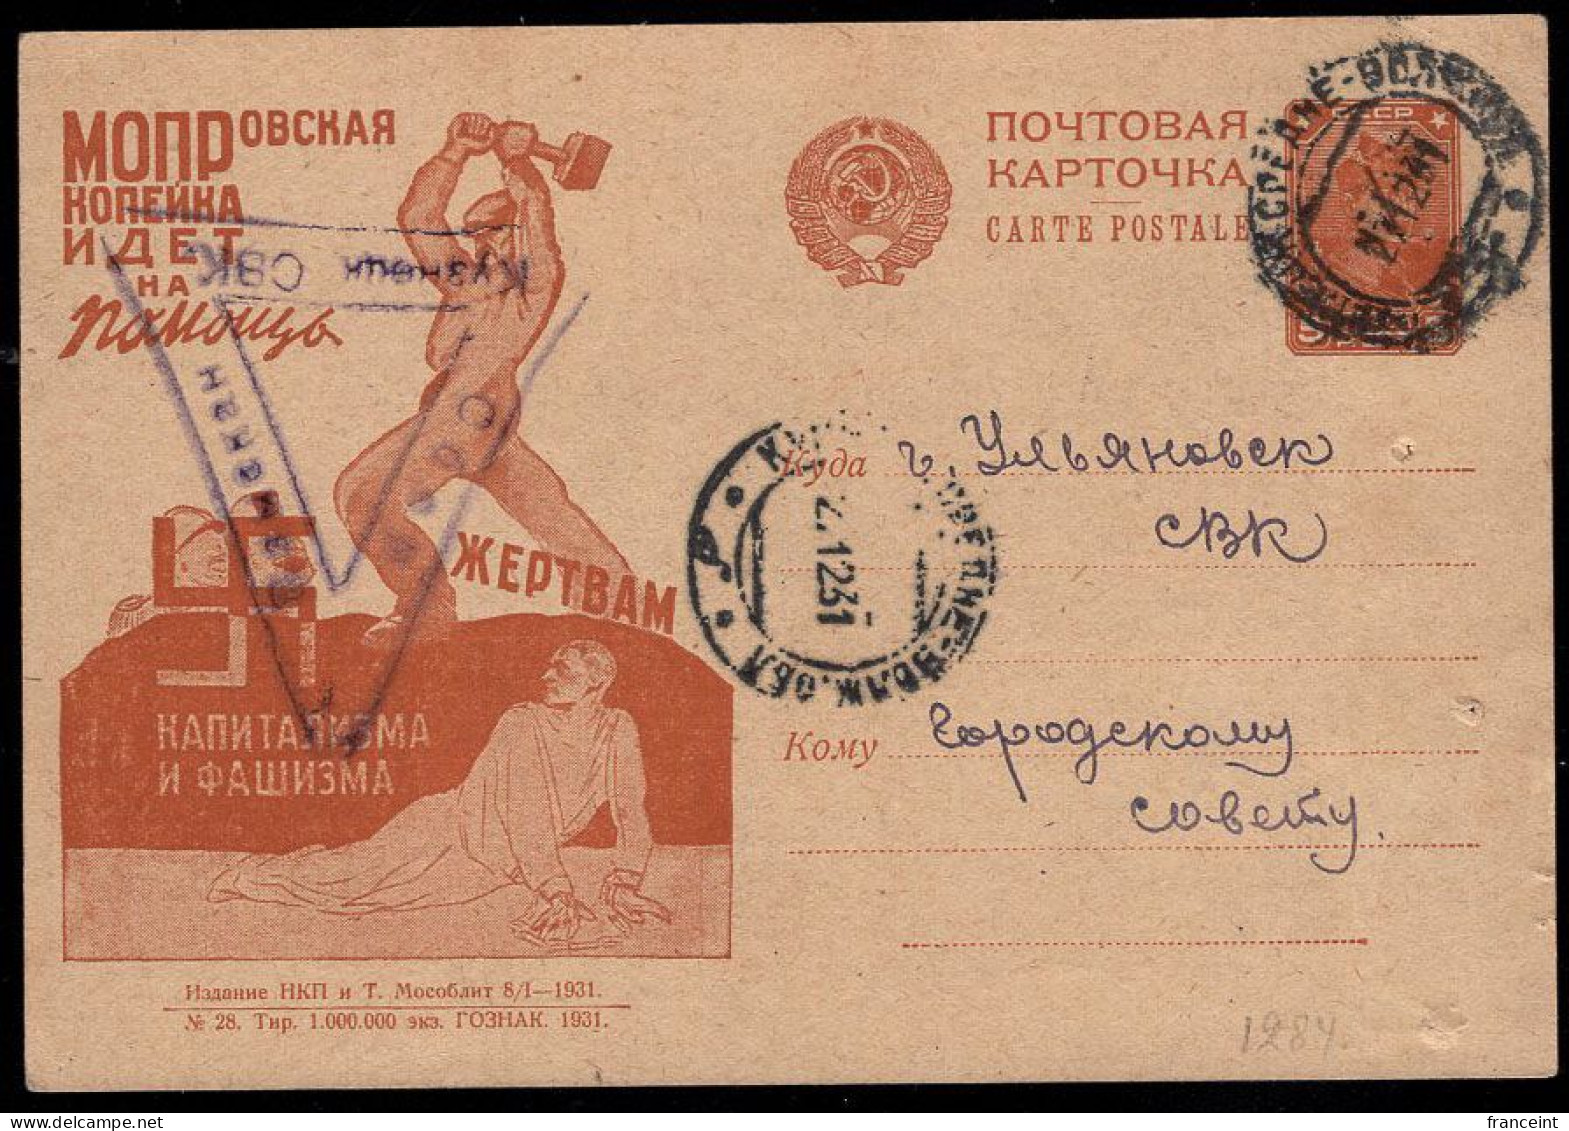 RUSSIA(1931) Man With Sledgehammer Smashing Swastika. Oppressed Worker. Postal Card With Illustrated Advertising "MOPR - - ...-1949